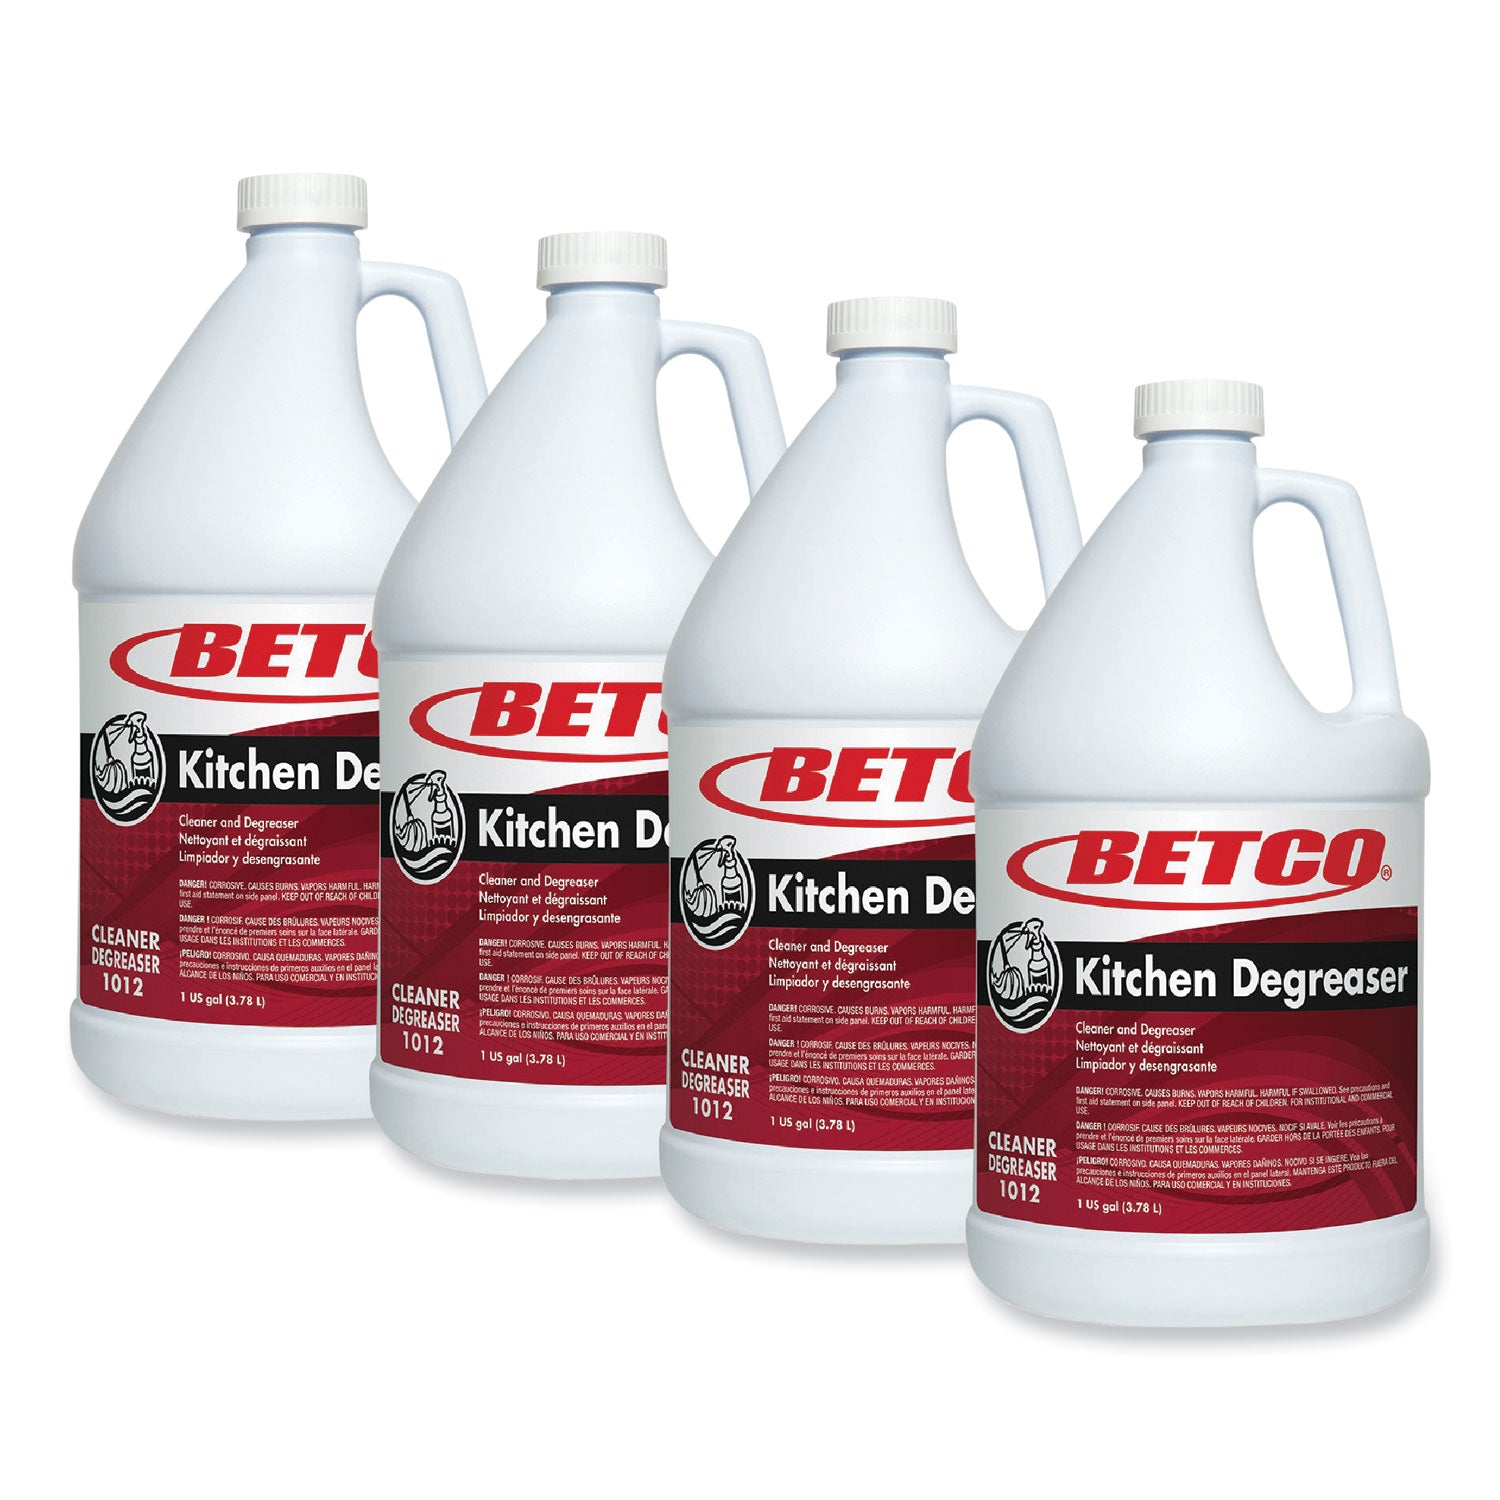 kitchen-degreaser-characteristic-scent-1-gal-bottle-4-carton_bet10120400 - 8